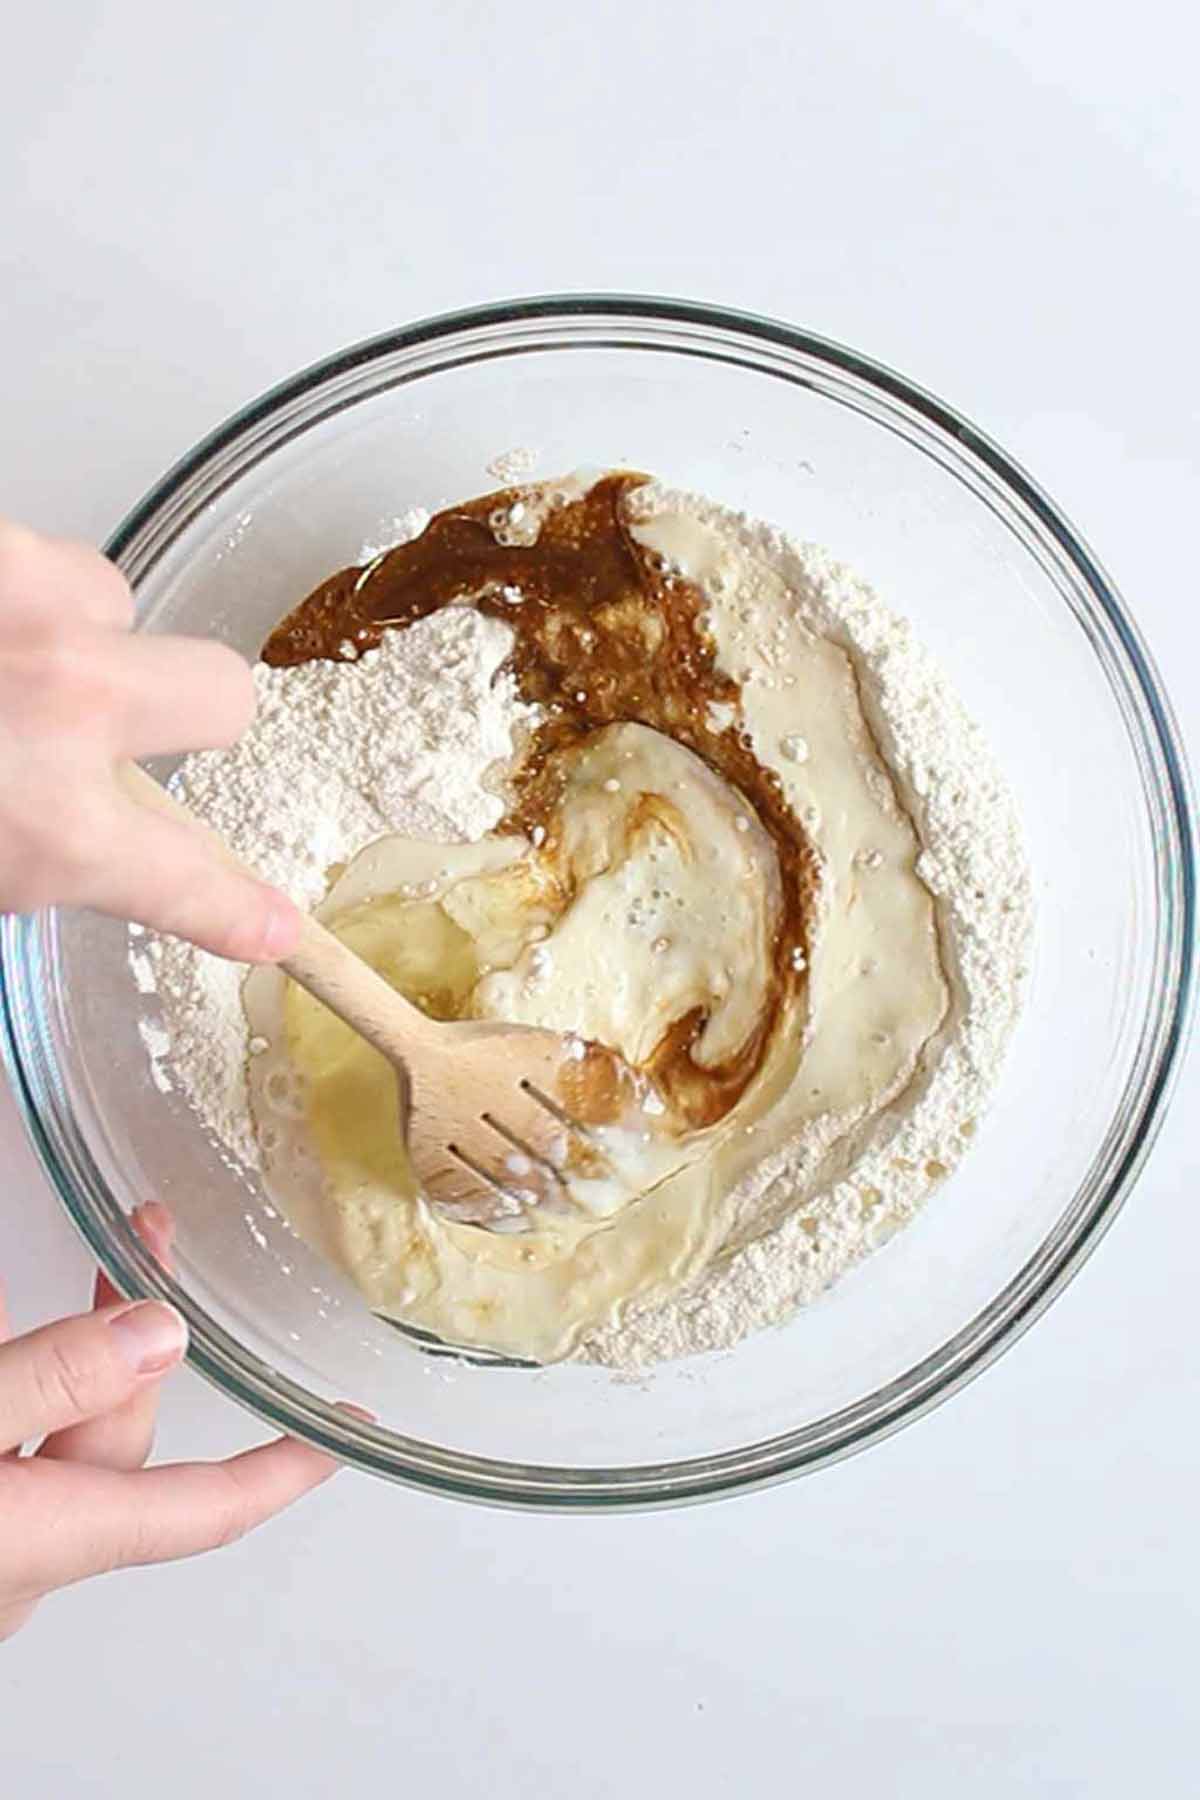 Mixing cake Ingredients Together In A Bowl